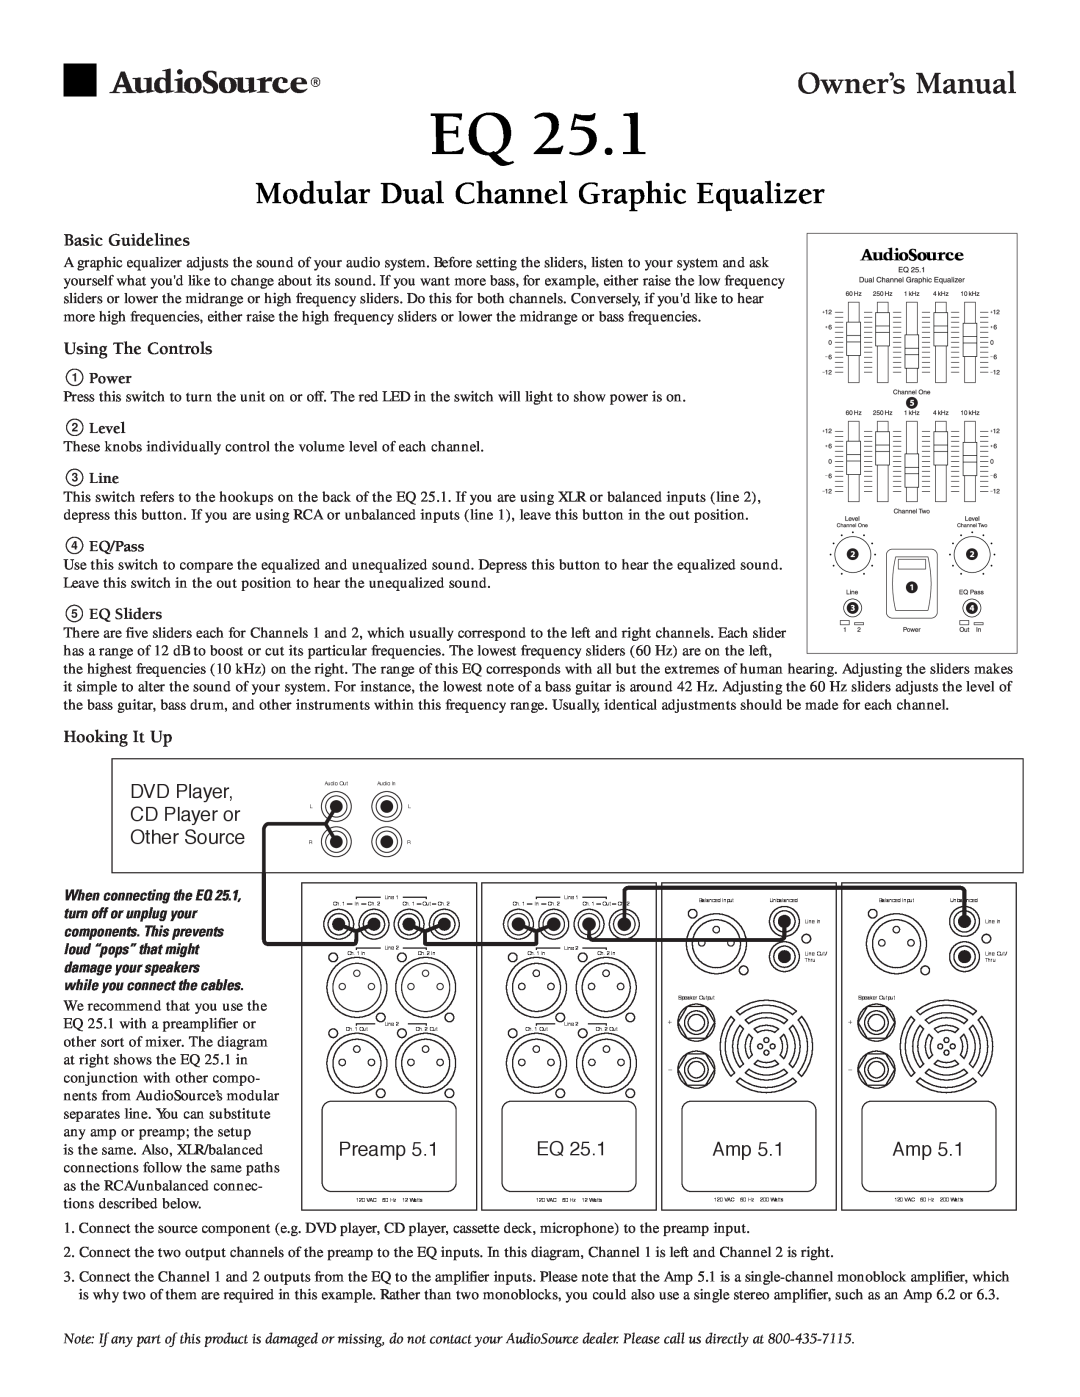 AudioSource Modular Dual Channel Graphic Equalizer owner manual Basic Guidelines, Using The Controls, Hooking It Up 